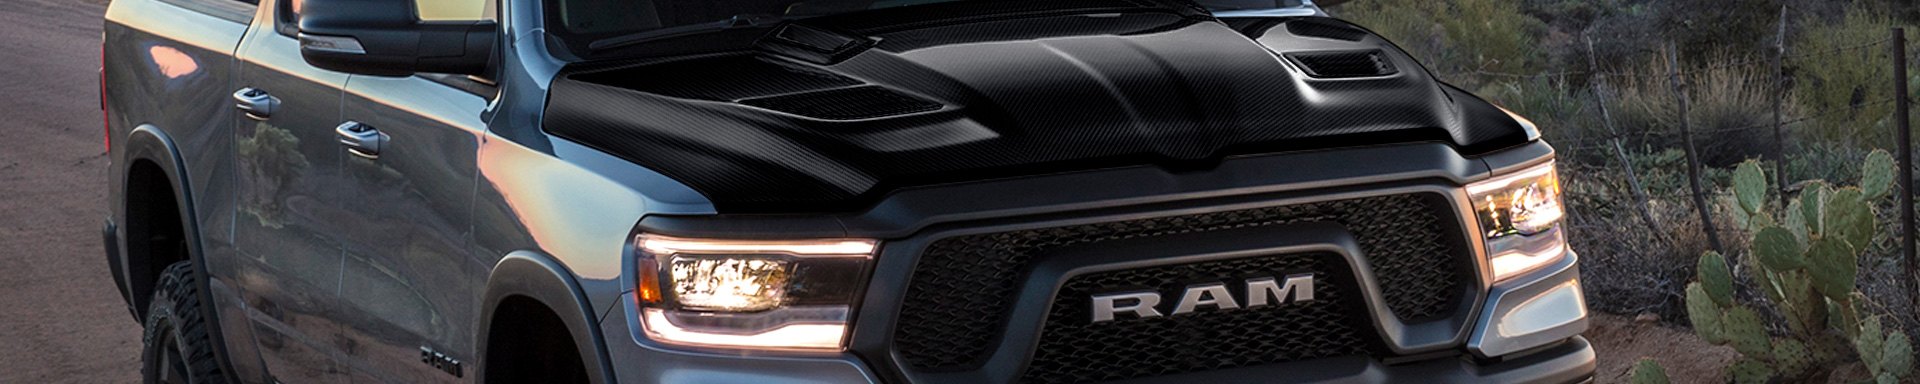 Customize Your 2019-2020 Ram With Carbon Creations Rebel Mopar Style Hood